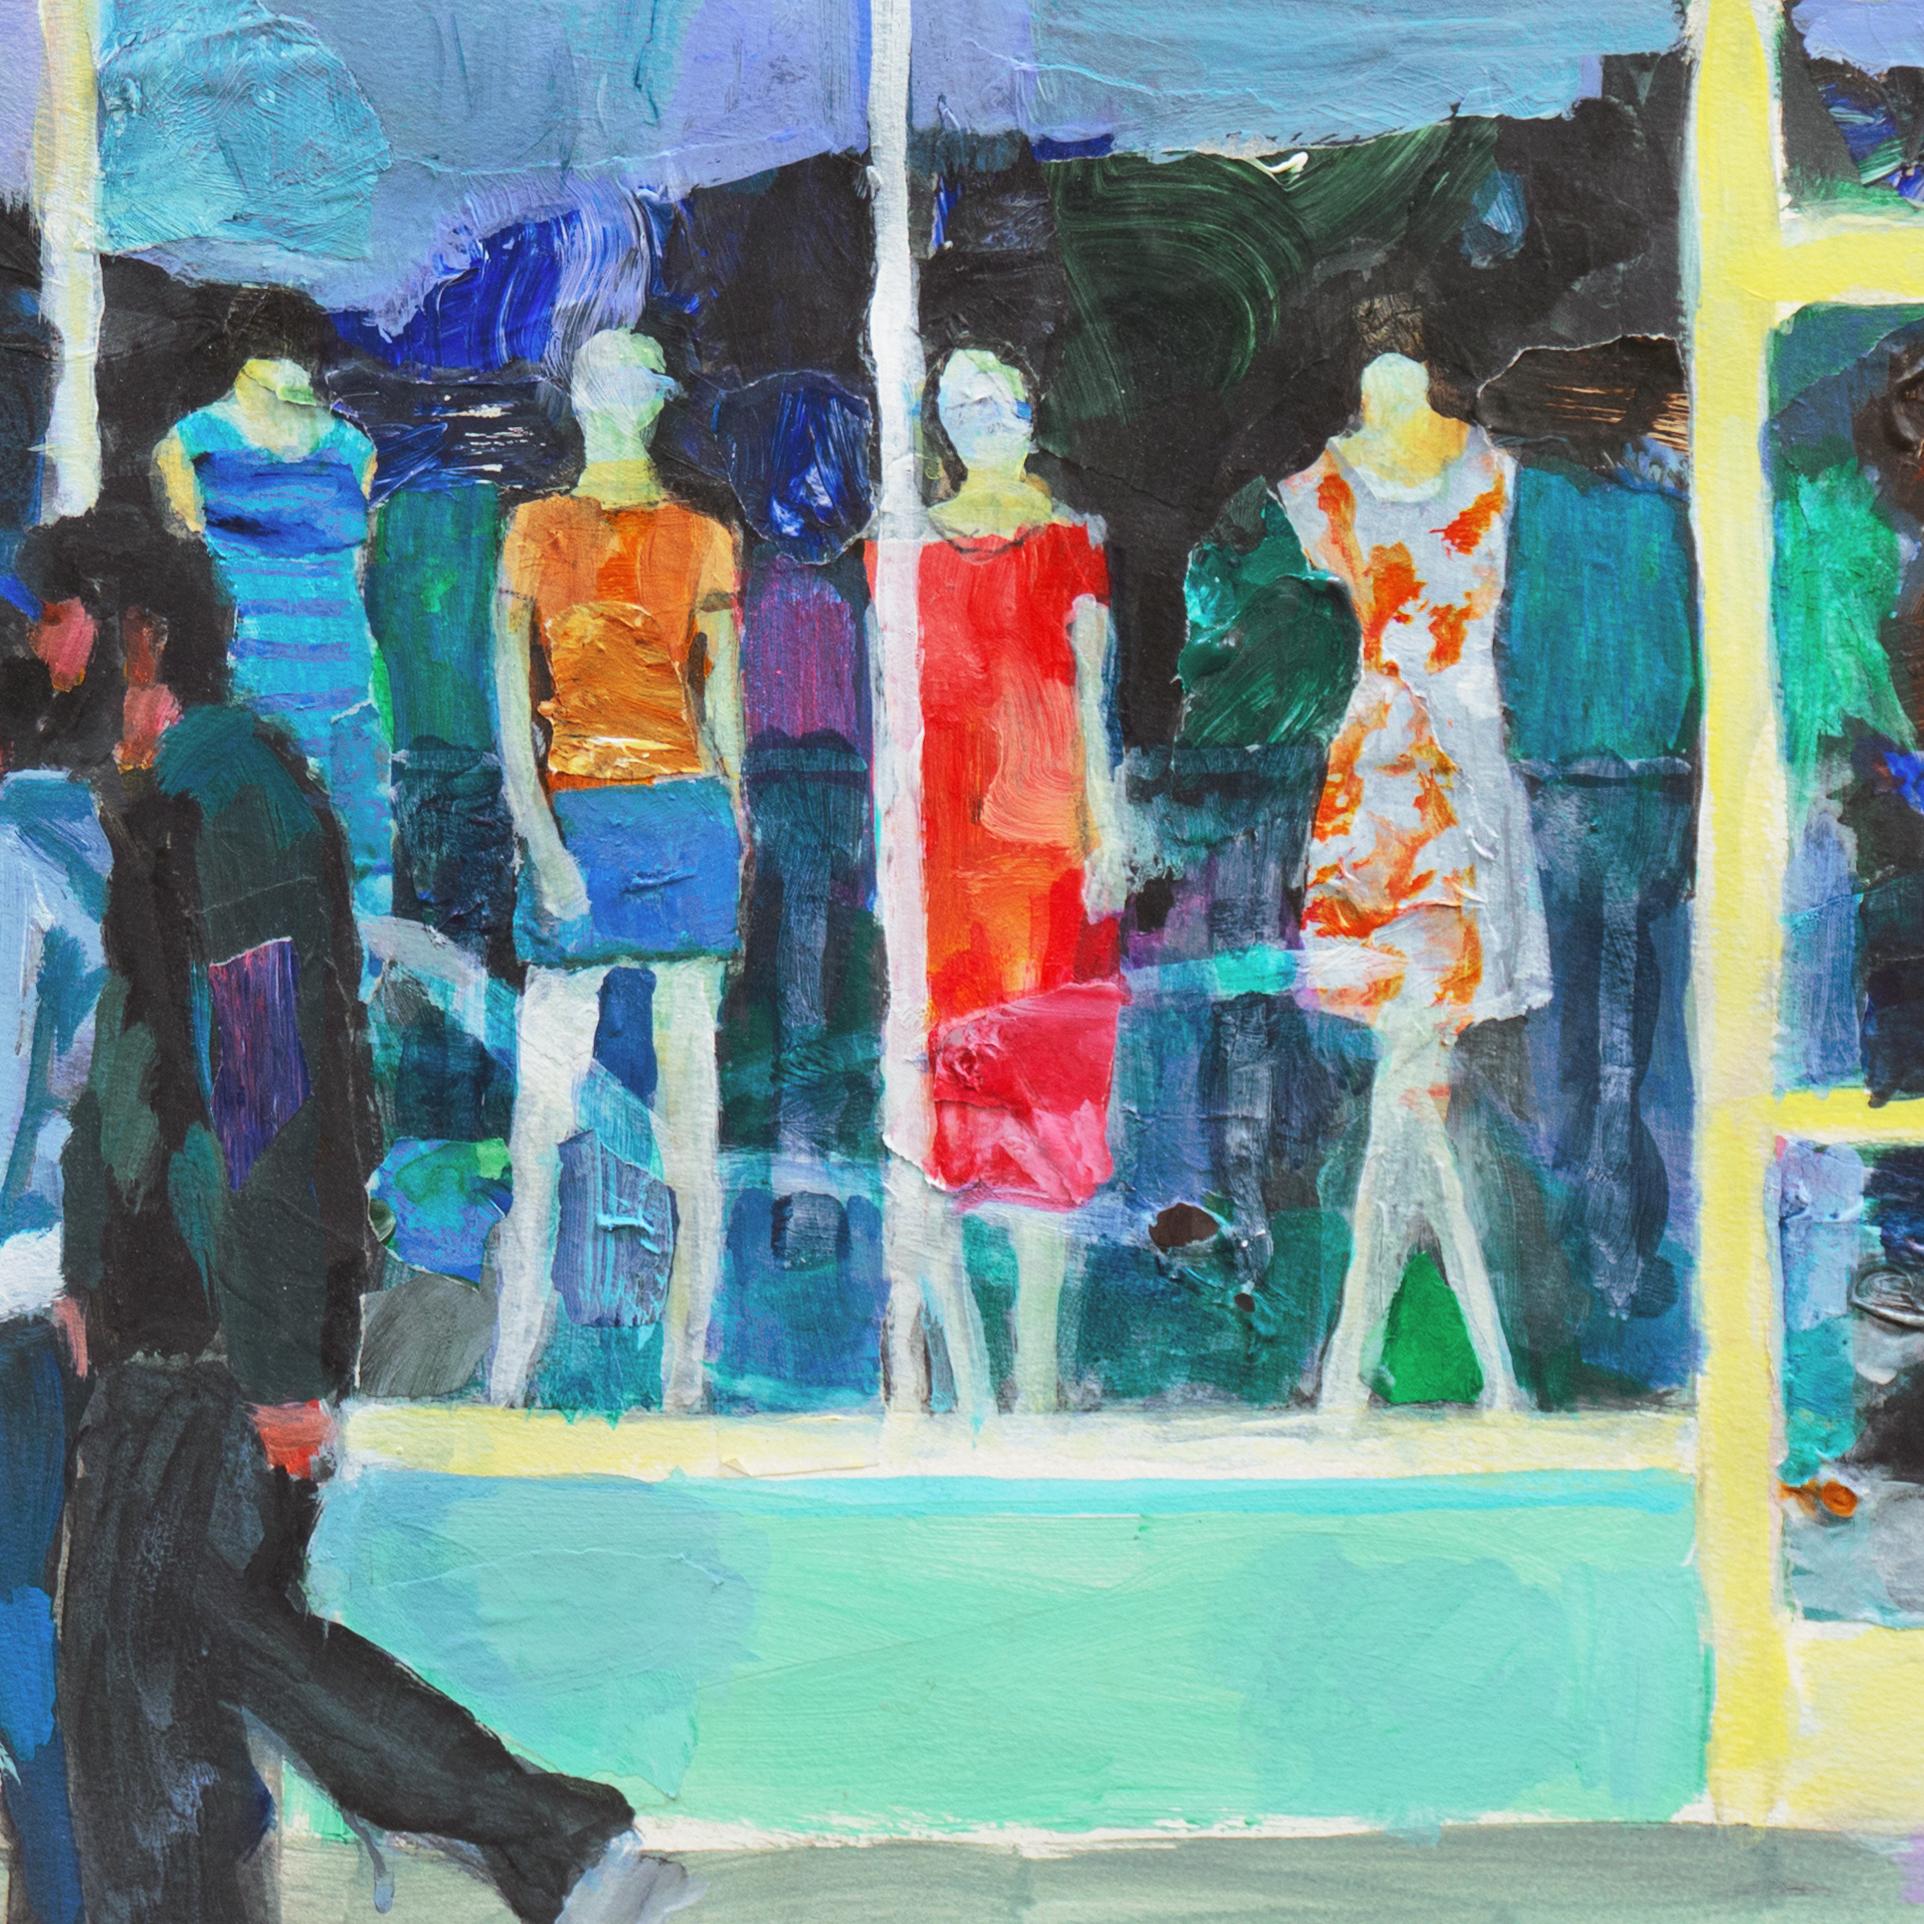 'Mannequins in a Store Window', Bay Area Figurative, Student of Wayne Thiebaud - Post-Impressionist Painting by Bud Gordon